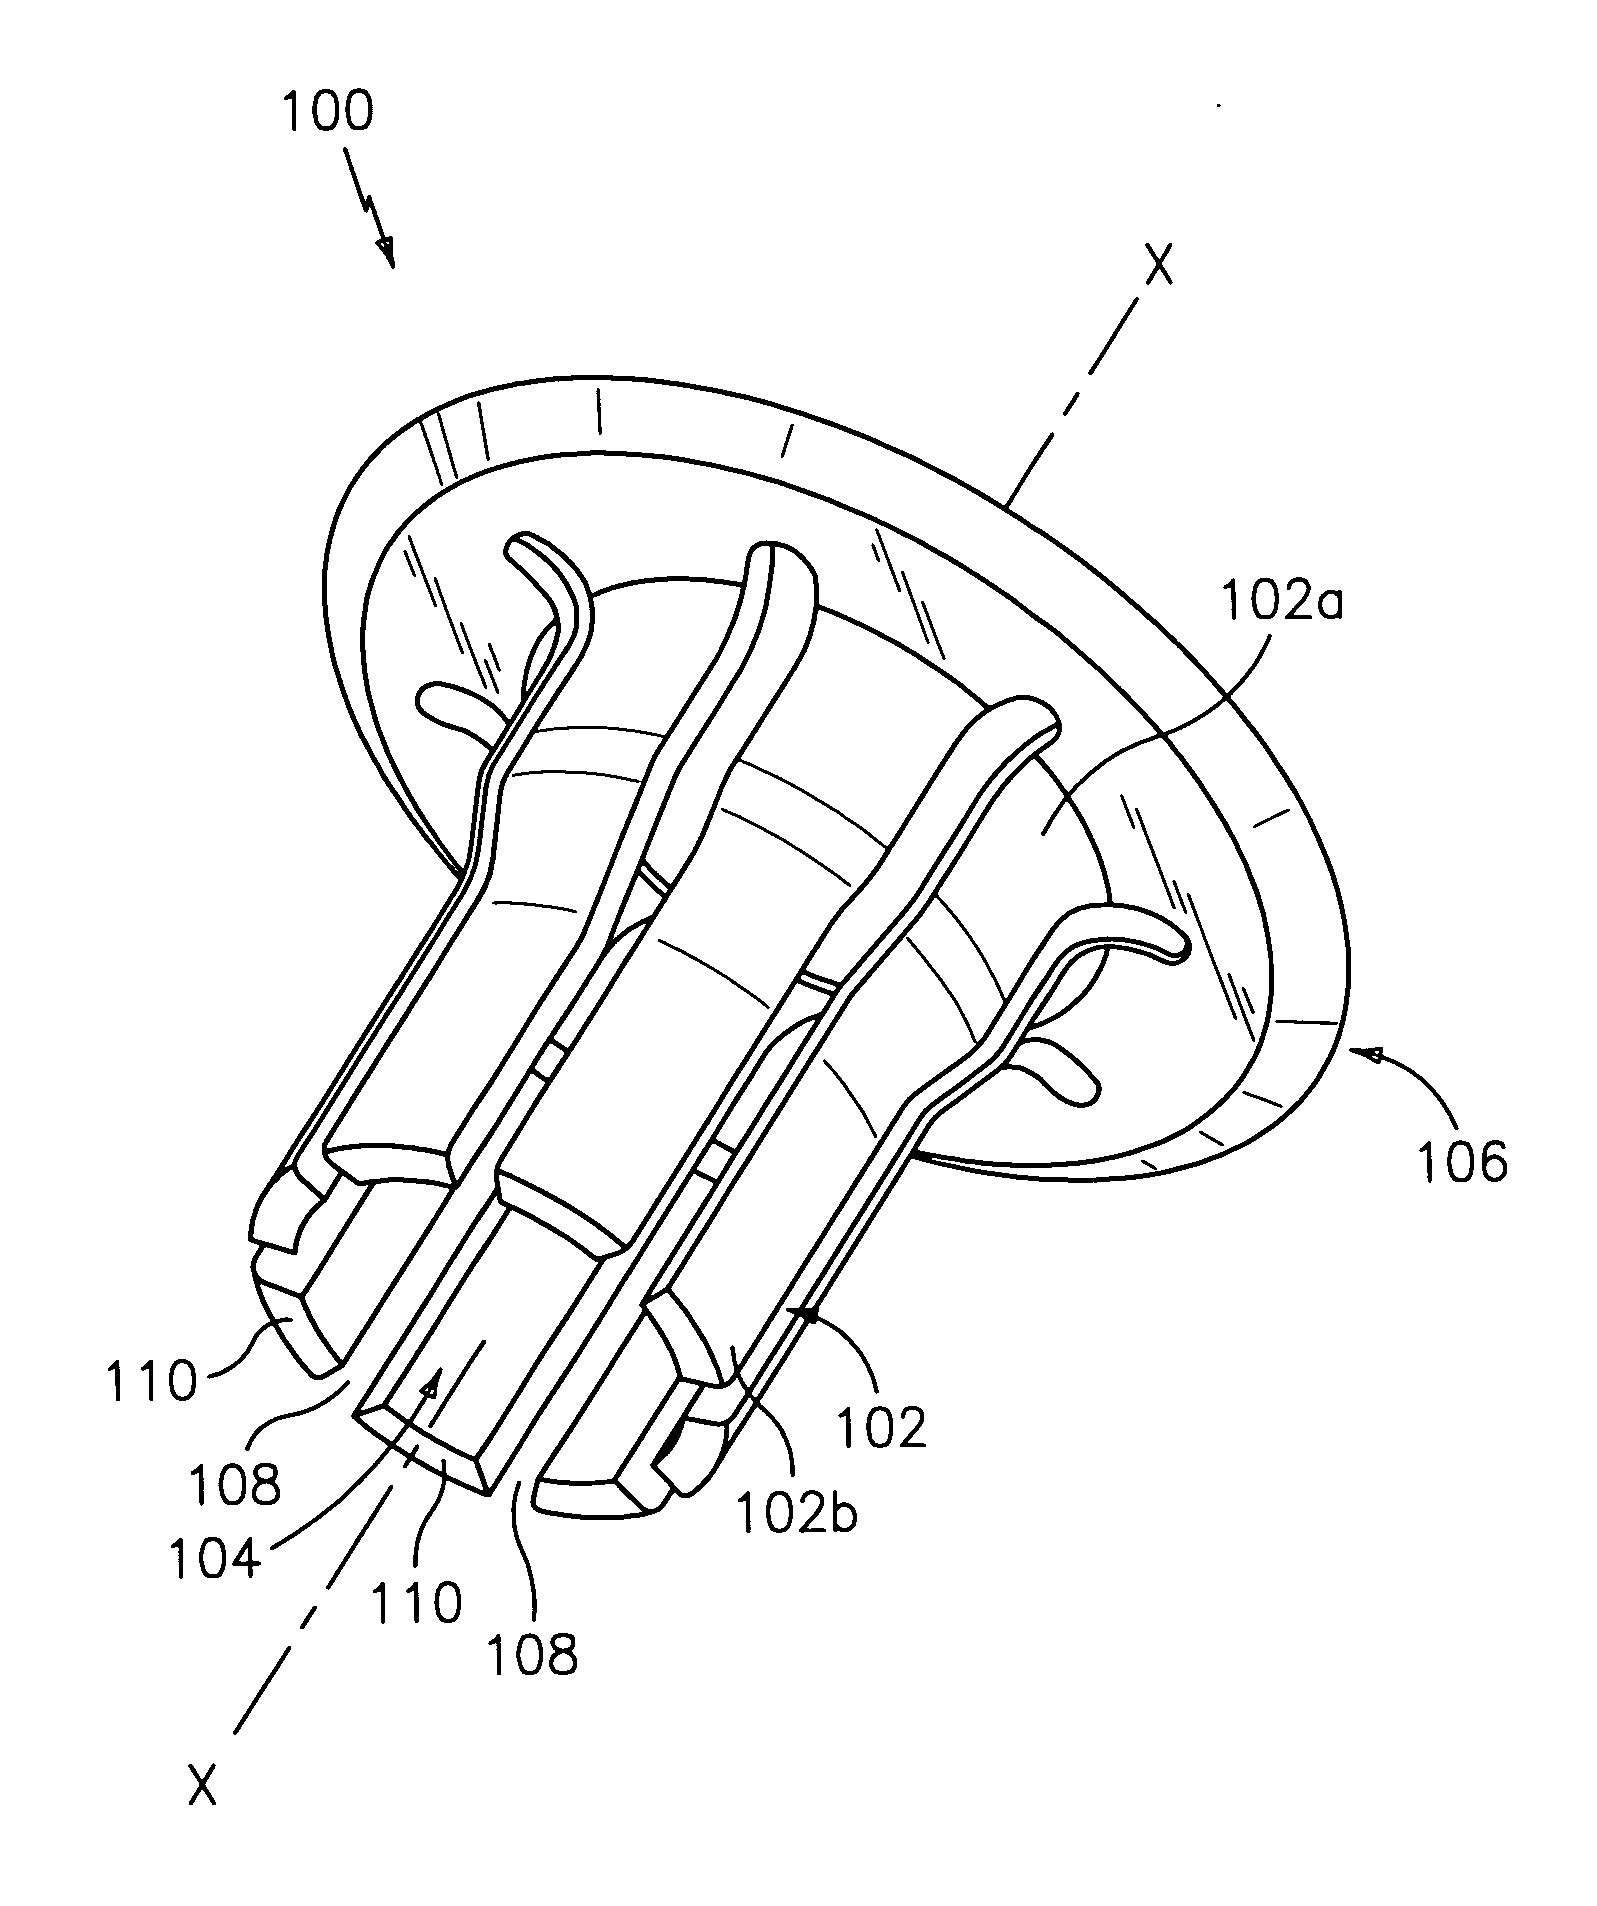 Hub for positioning annular structure on a surgical device